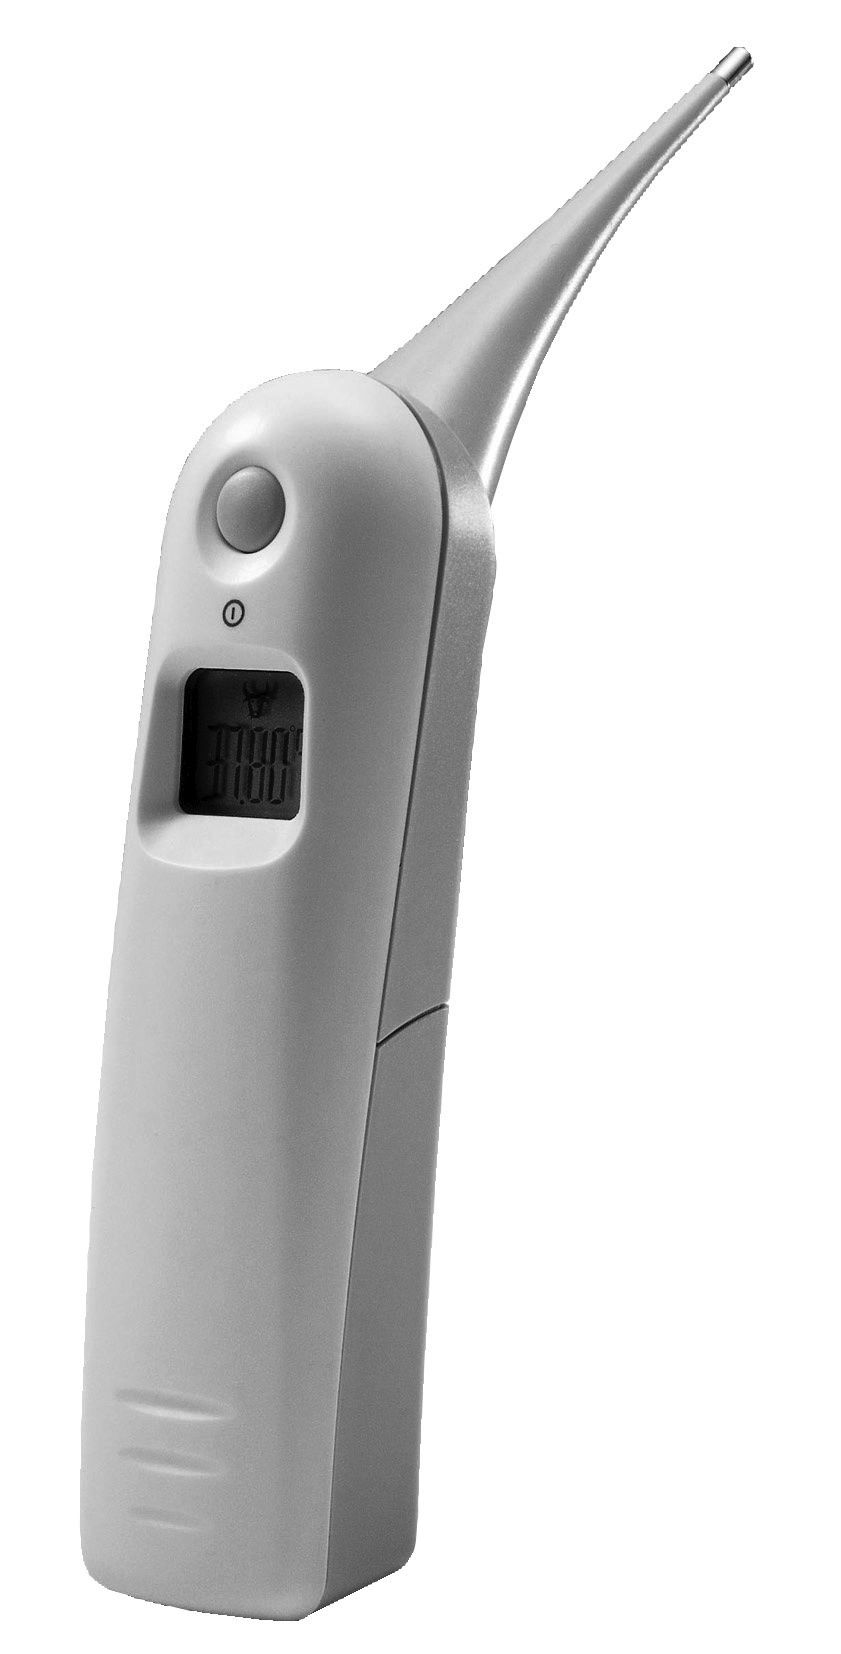 Digital Thermometer topTemp 